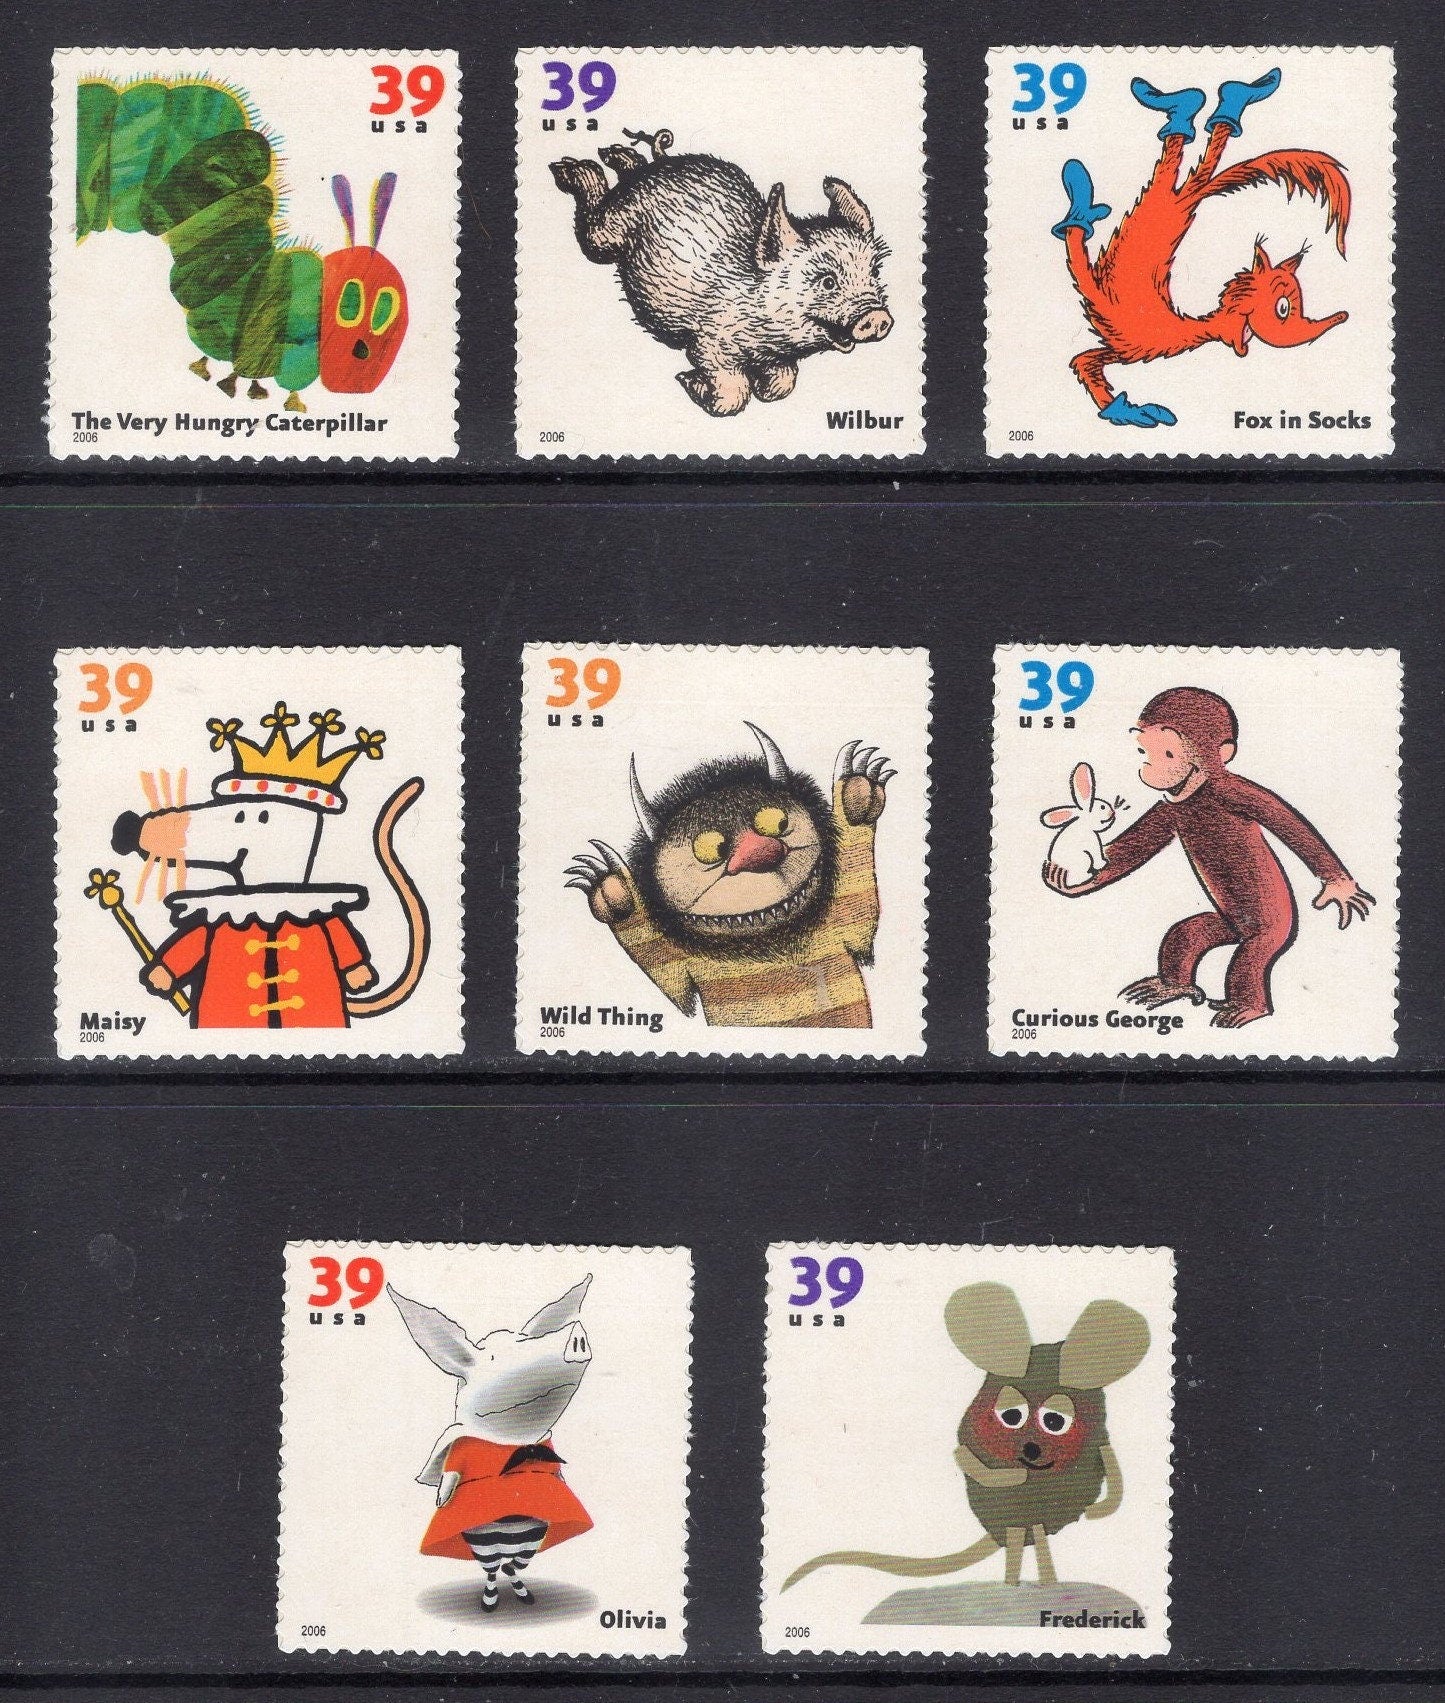 8 CHILDREN'S BOOK ANIMALS inc Curious George Unused Fresh USA Postage Stamps - Quantity Available - Issued in 2006 - s3987 -